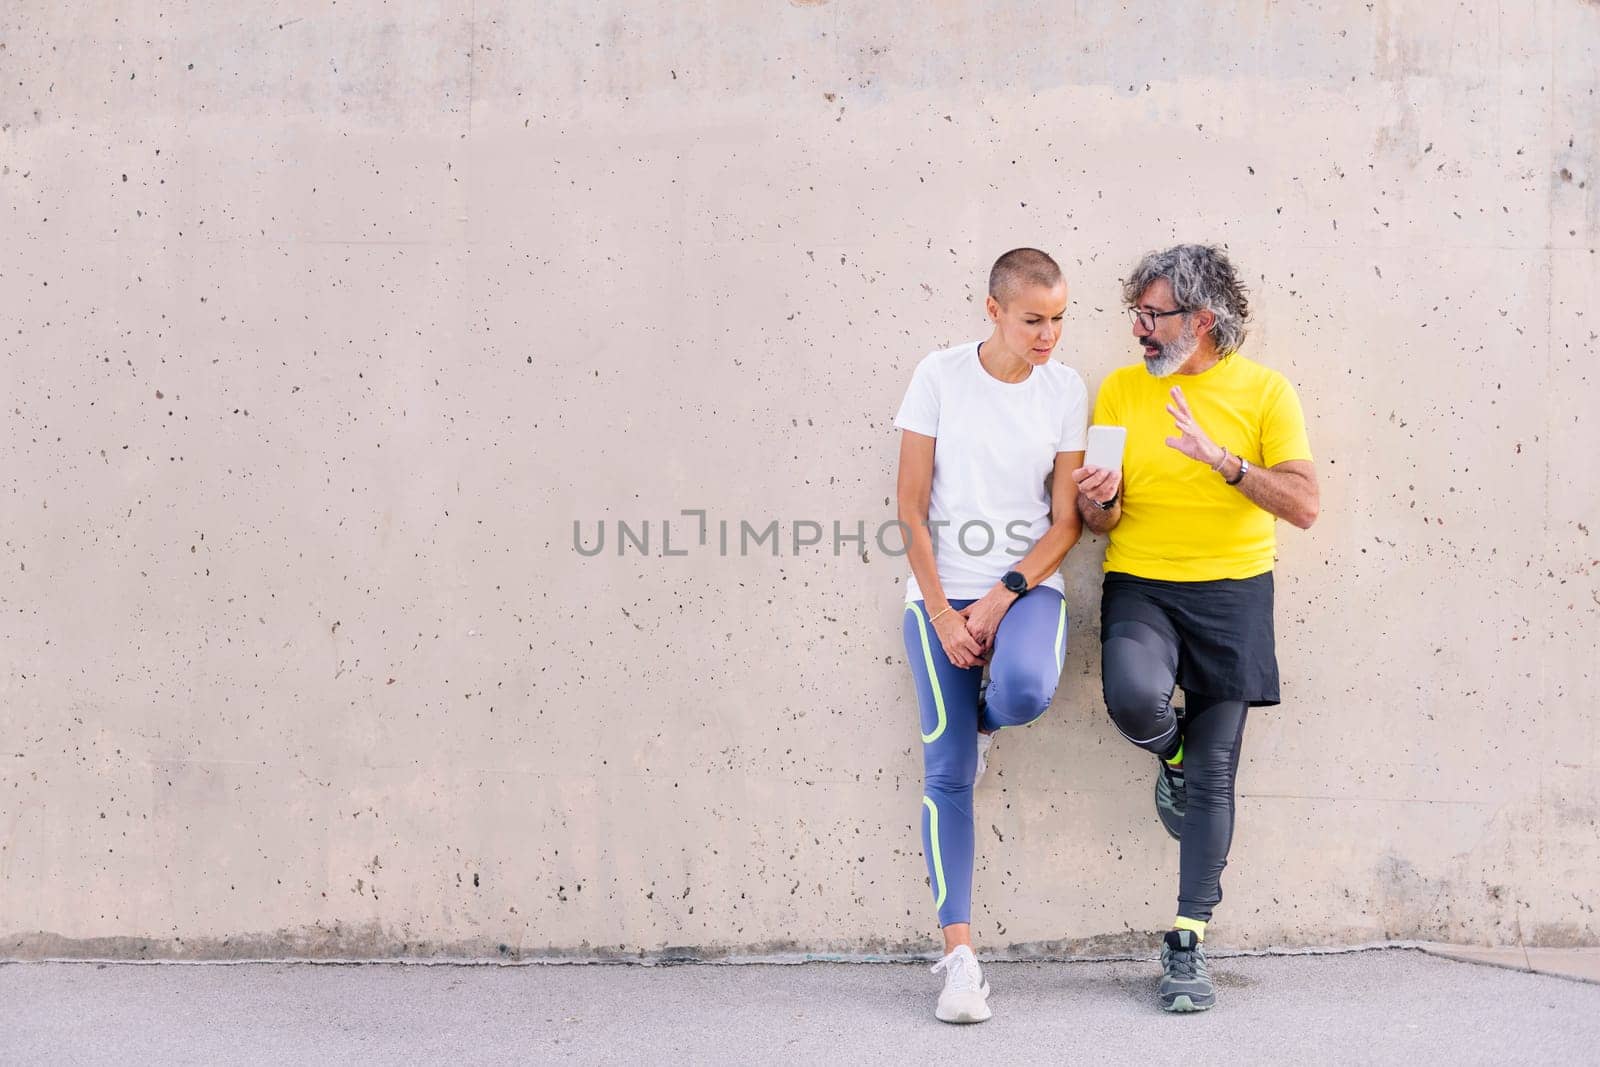 senior sports man and young sports woman talking and using mobile phone leaning an a wall, concept of technology of communication, copy space for text